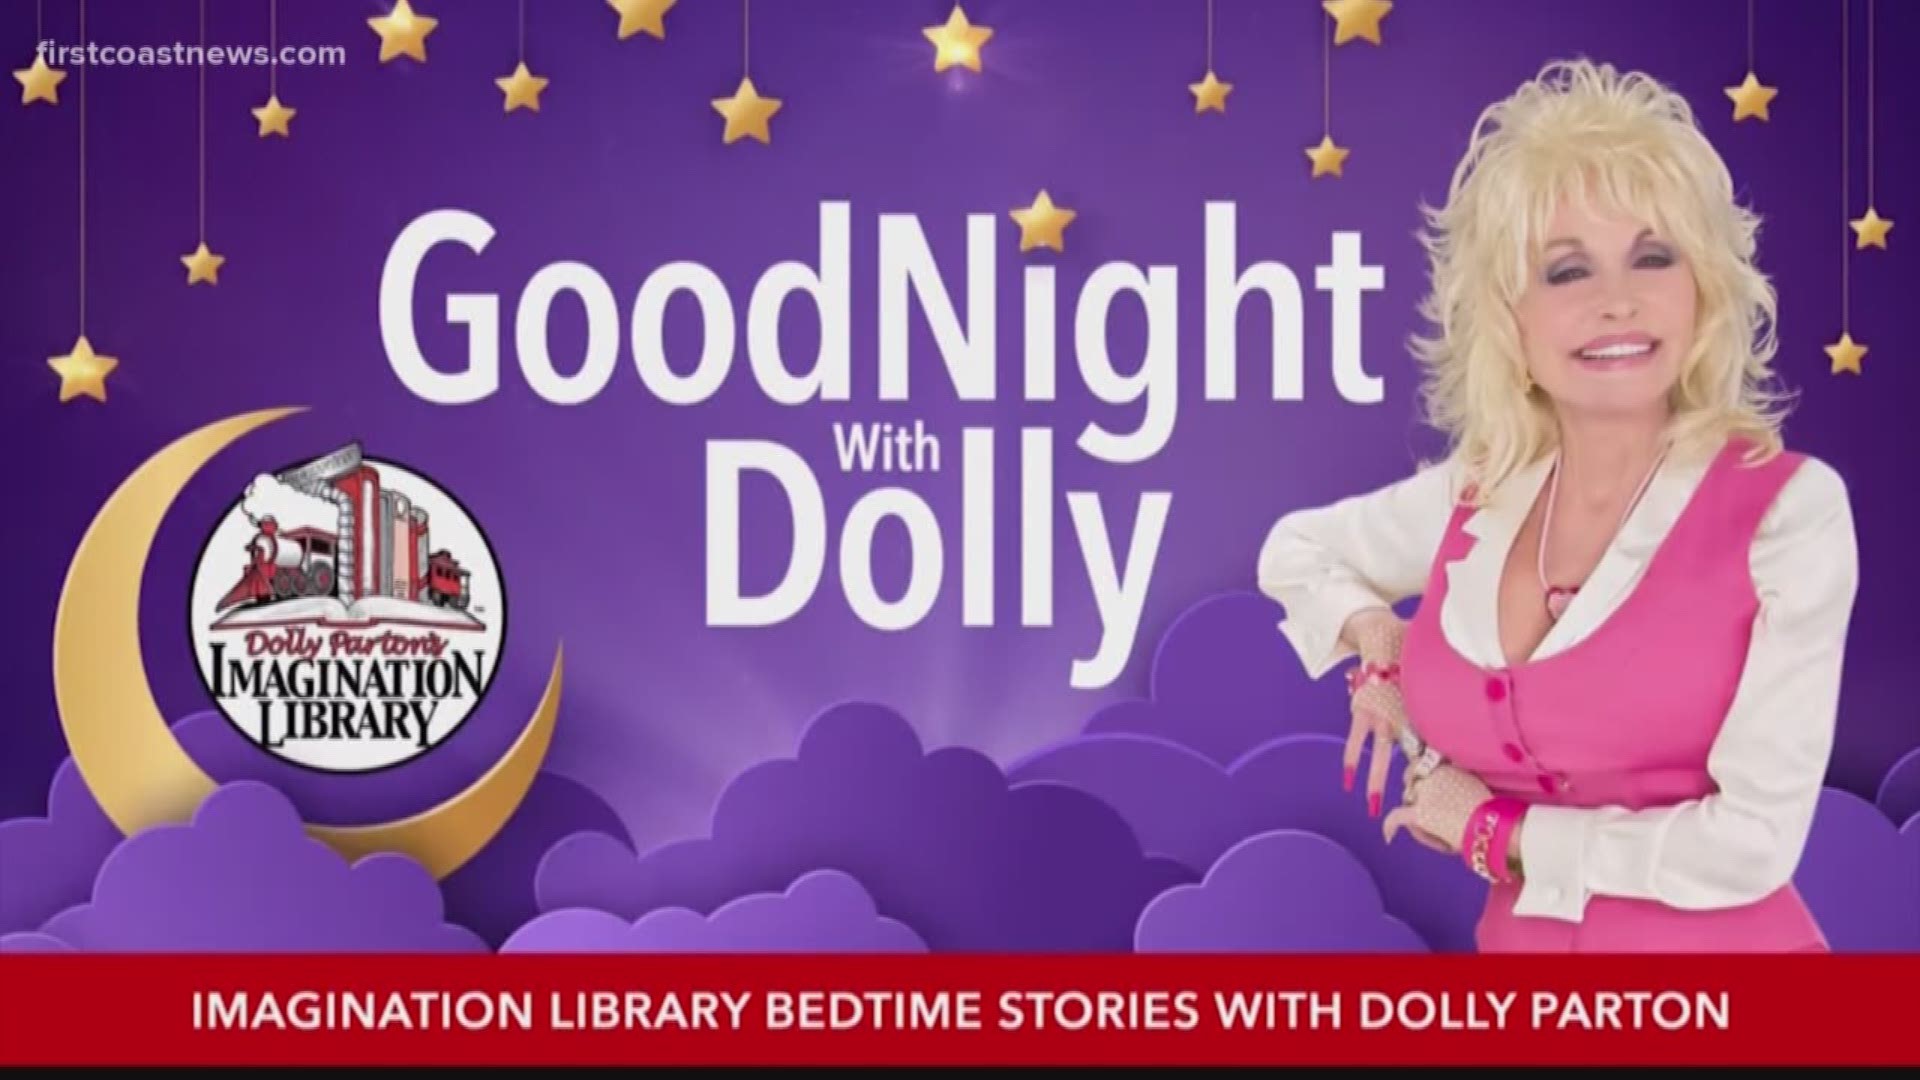 The country music superstar will be reading bedtime stories to children for the next few months.